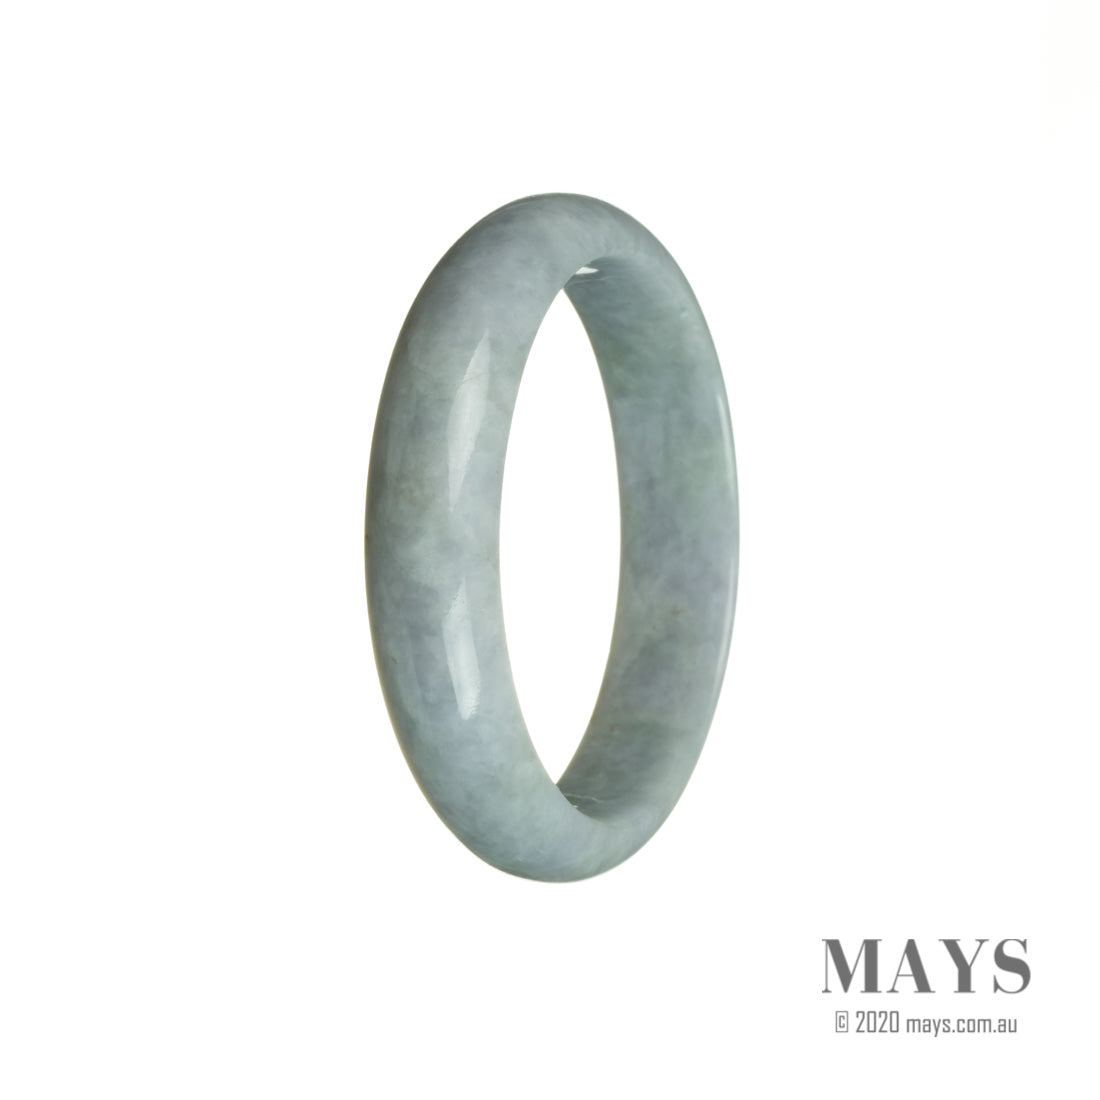 A beautiful lavender-colored jade bangle with a half moon shape, made from high-quality Grade A jadeite jade.